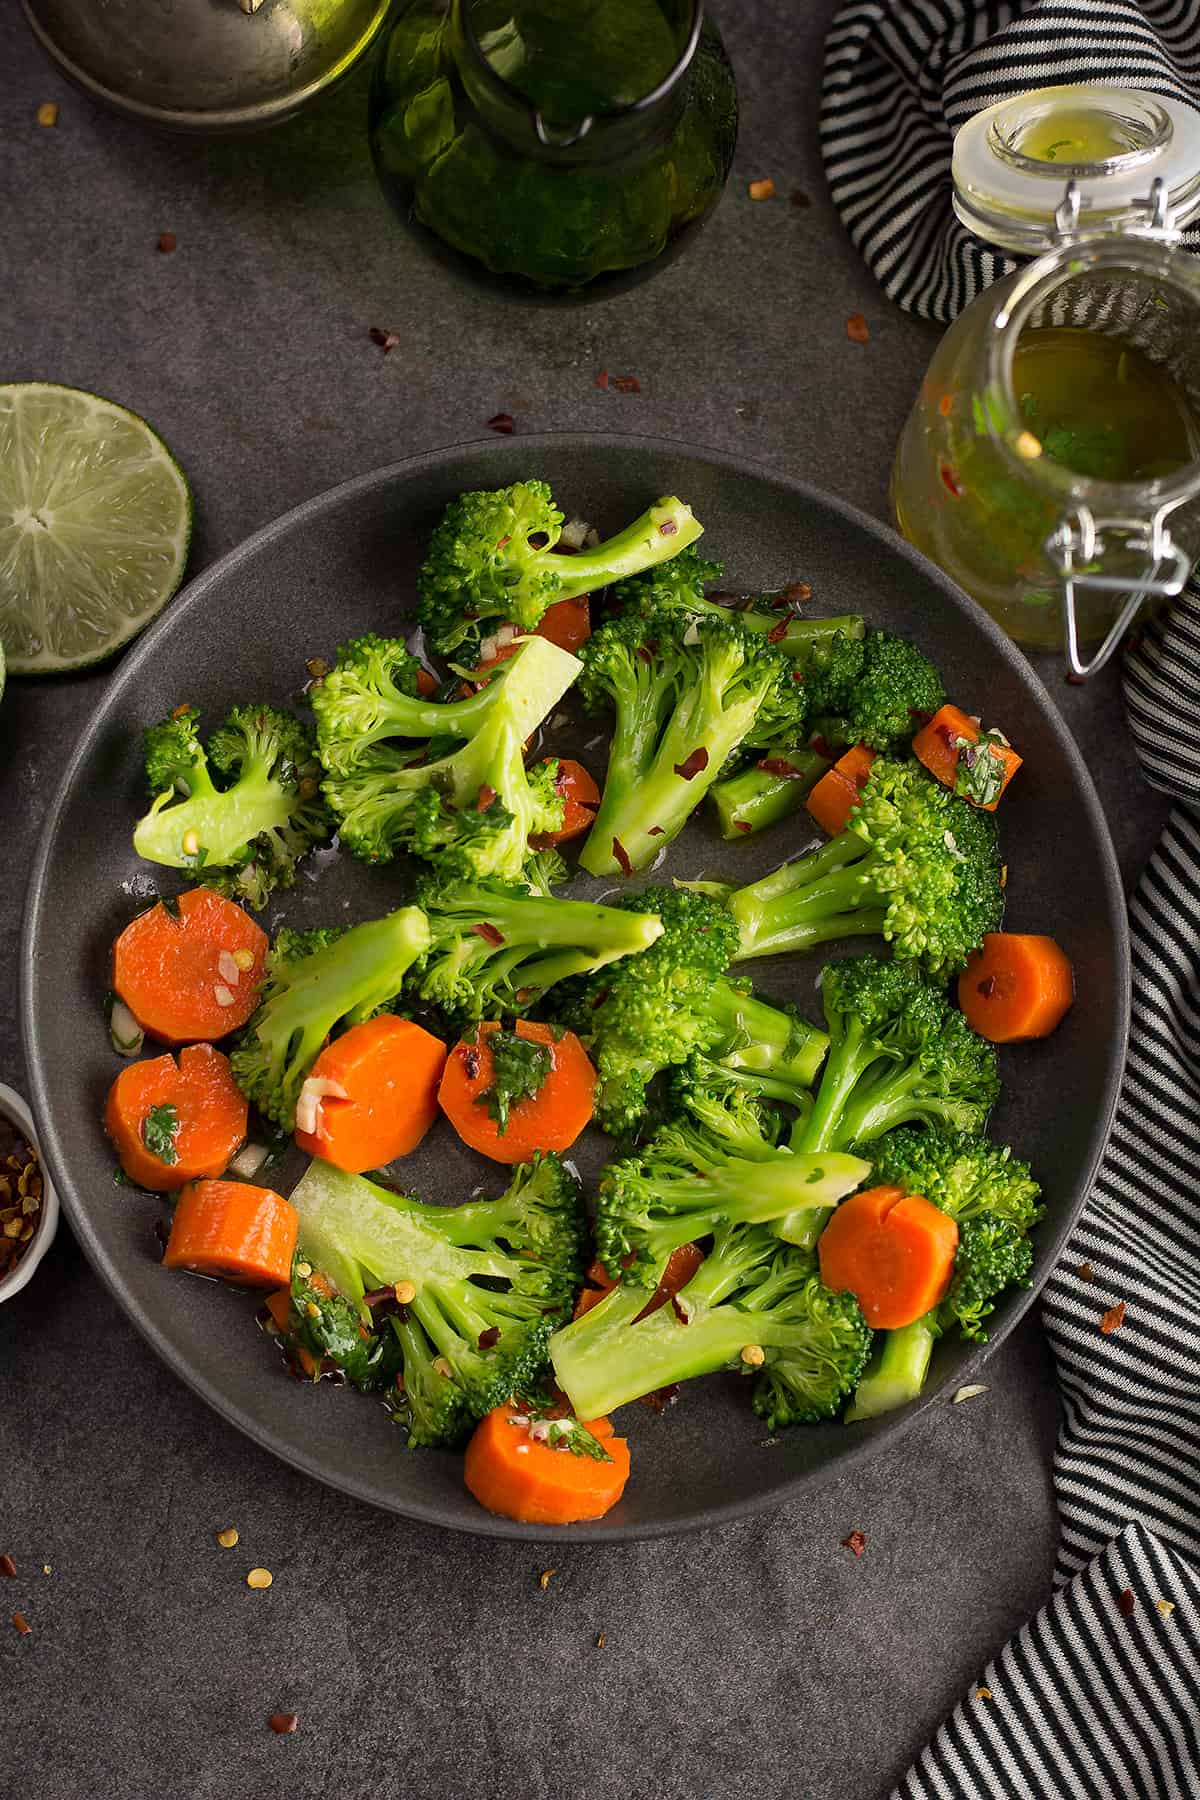 Spicy broccoli salad served in a decorative bowl.